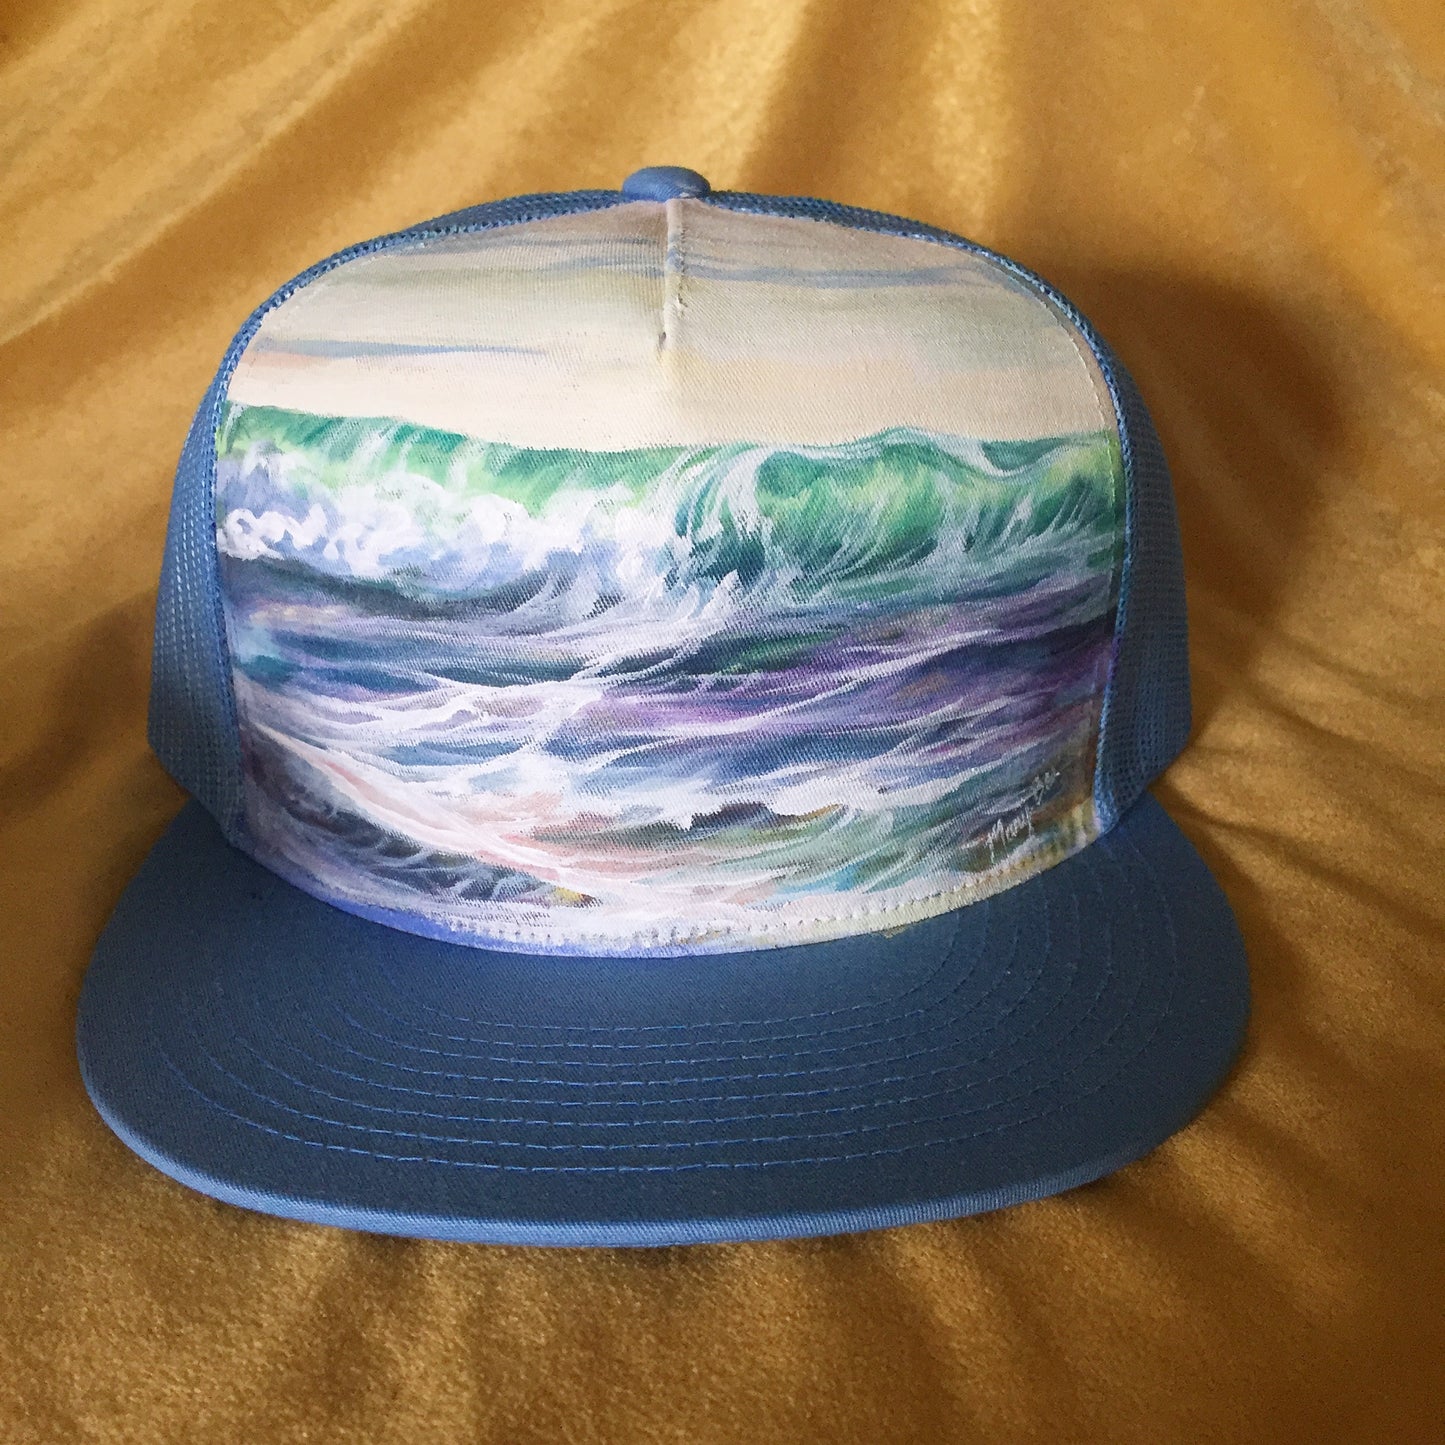 "Waves" Hand Painted on Baby Blue Snapback Trucker Hat